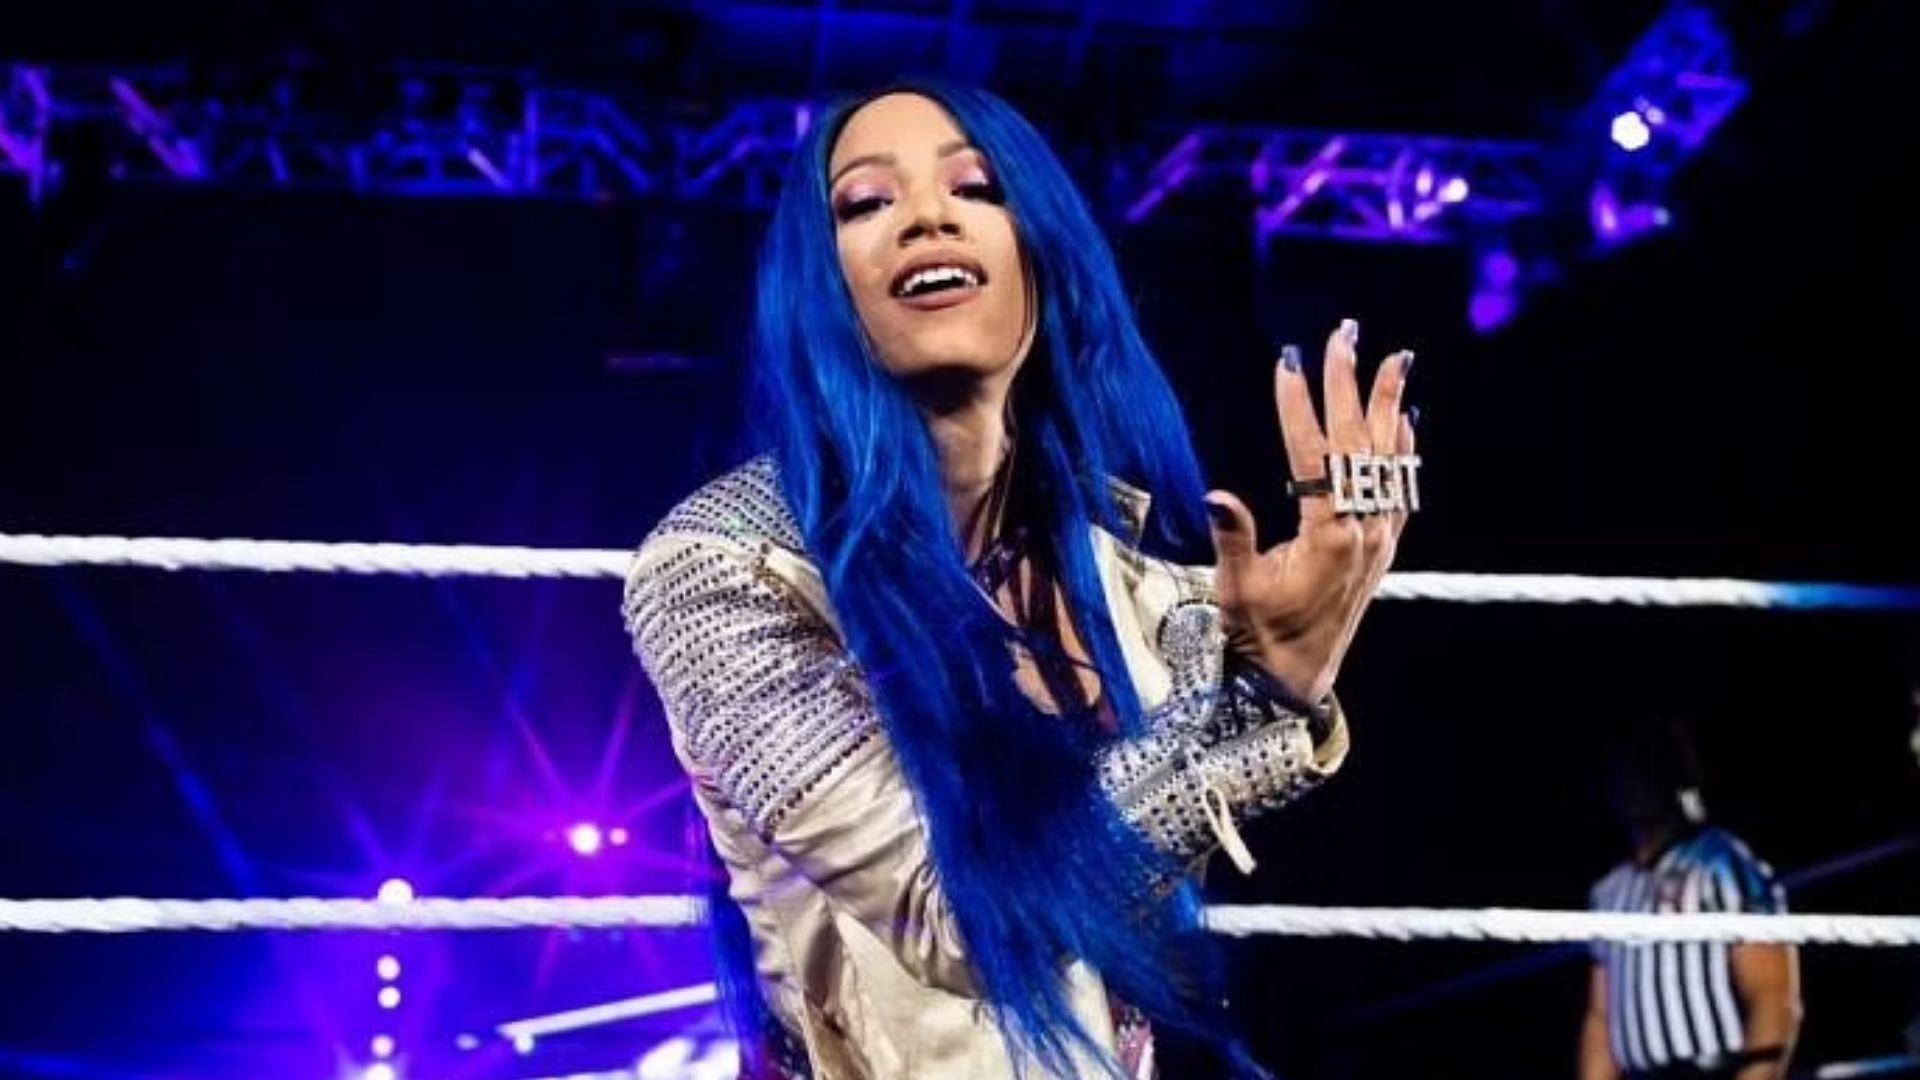 5 times WWE Superstar Sasha Banks was involved in backstage controversy